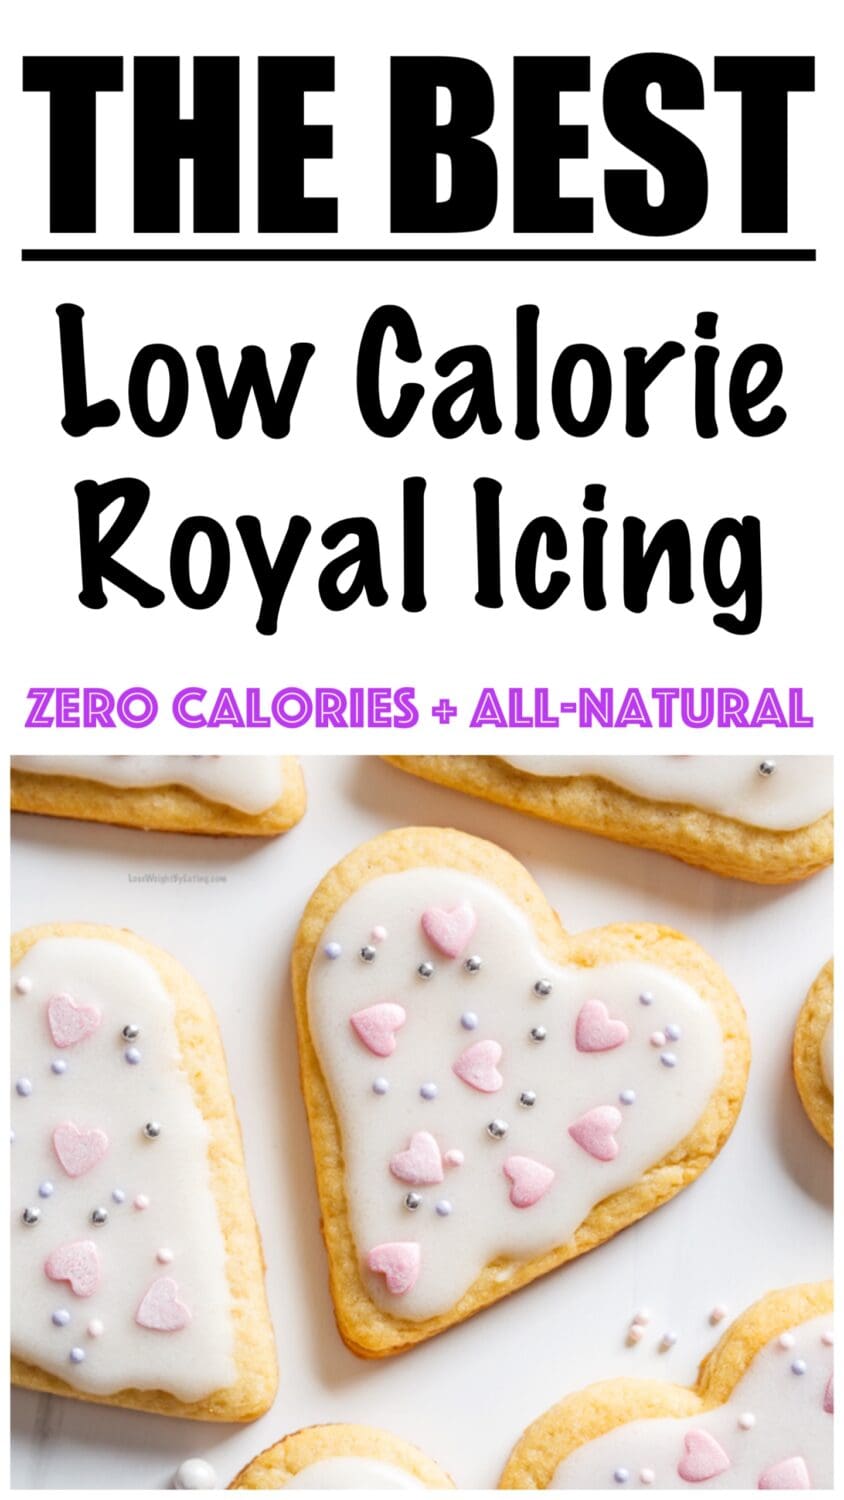 Low Calorie Royal Icing